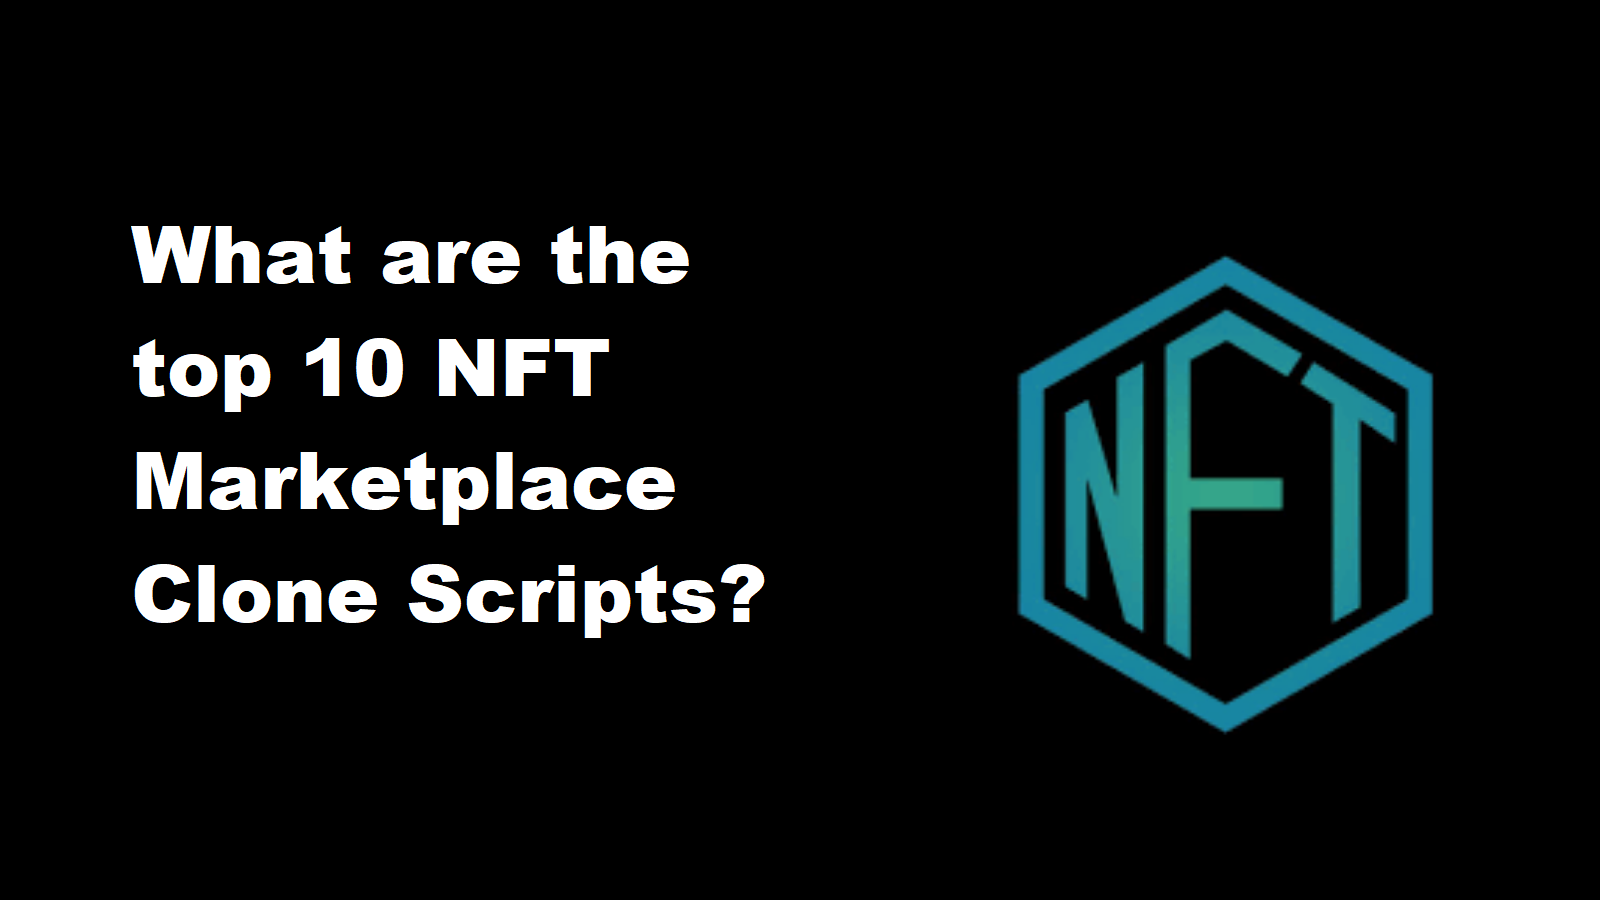 What are the top 10 NFT Marketplace Clone Scripts